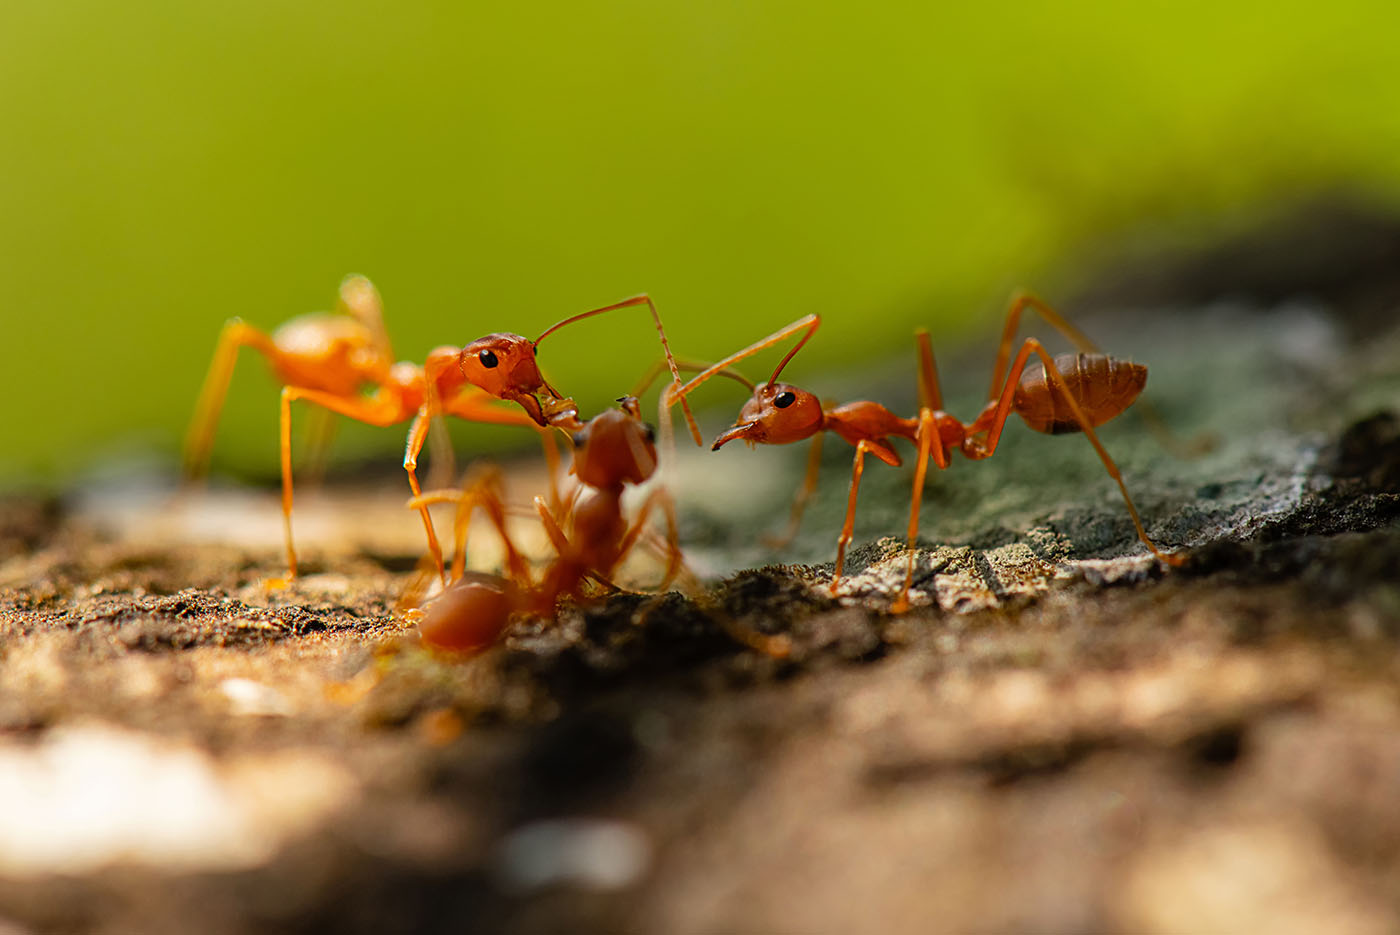 A group of ants on a log - experience the best ant control in Killeen, TX with GGA Pest Management.